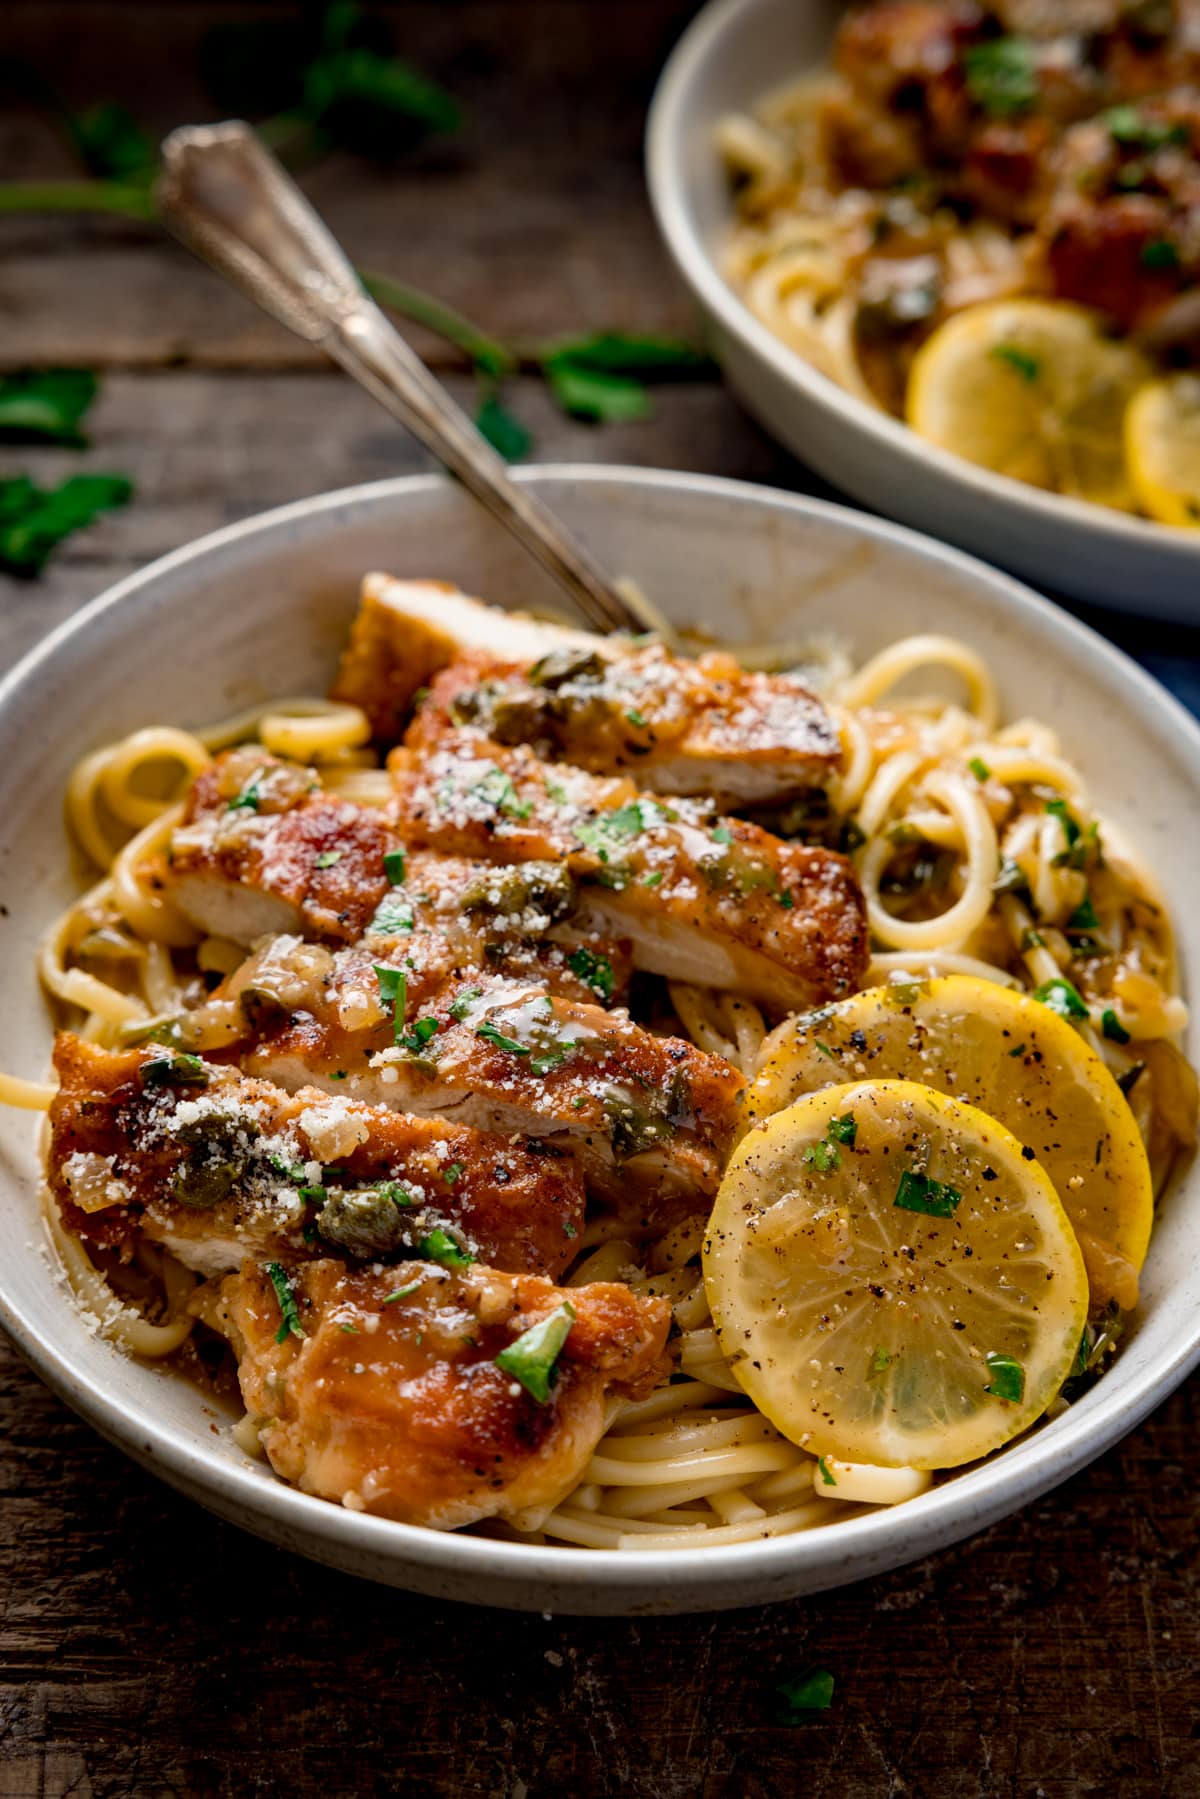 Tall image of lemon chicken piccata on a bed of linguine with slices of lemon in a white bowl. The chicken has been sliced into strips. The bowl is on a wooden table and there is a fork sticking out. There is a second bowl in the background.